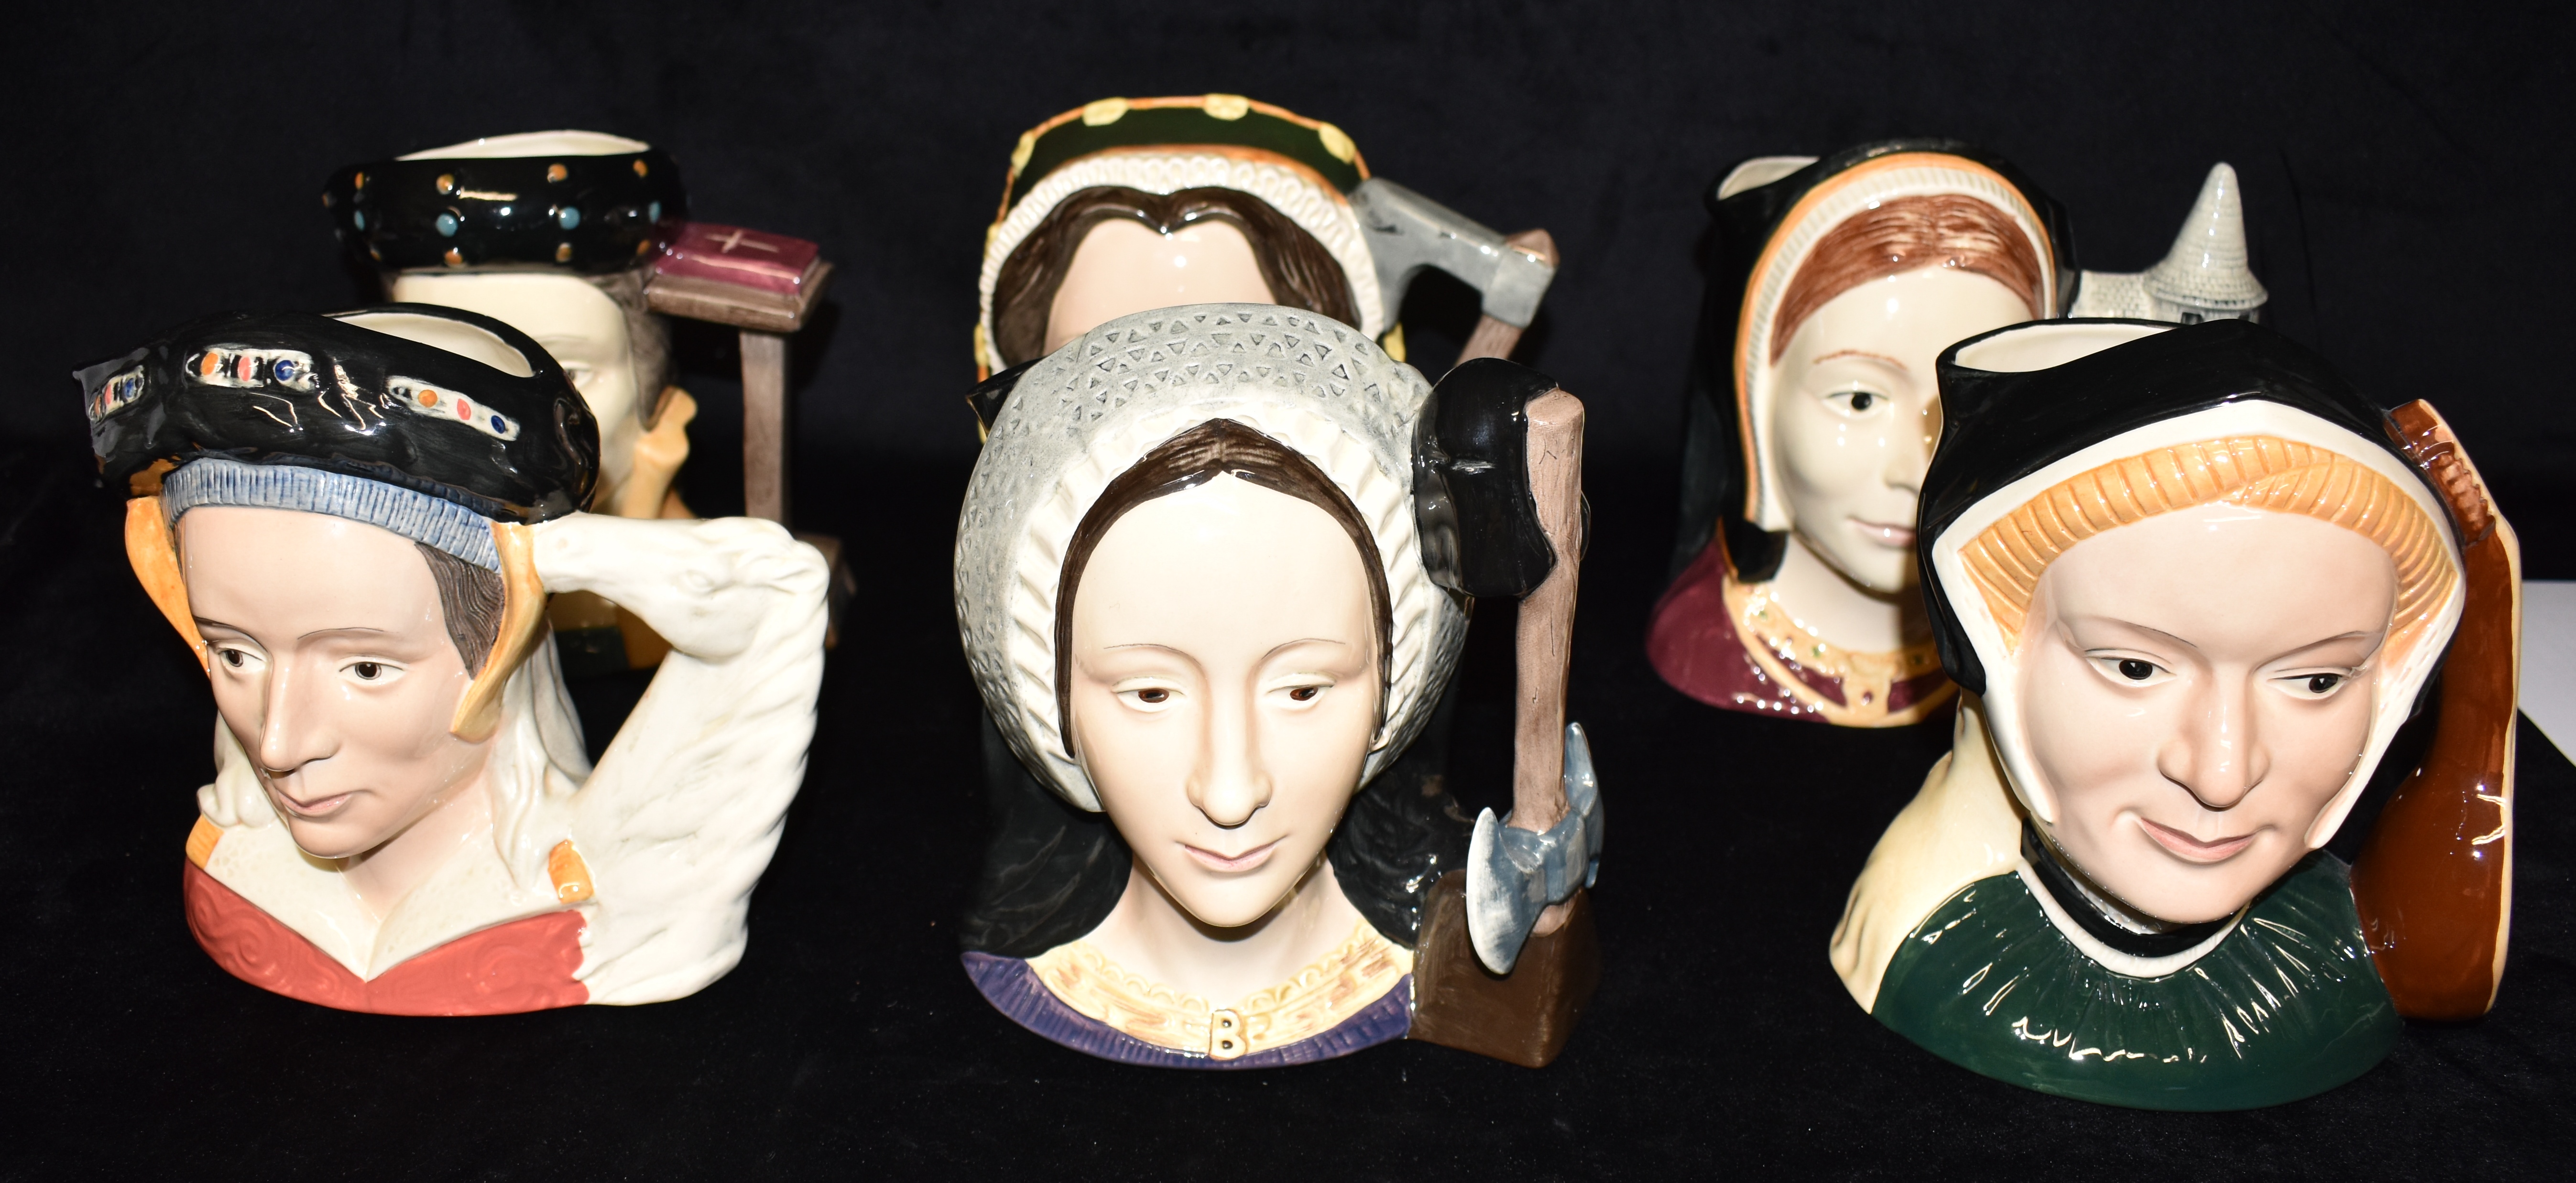 A SET OF SEVEN ROYAL DOULTON CHARACTER JUGS OF HENRY VIII AND HIS SIX WIVES: D6642 'Henry VIII', - Image 2 of 3